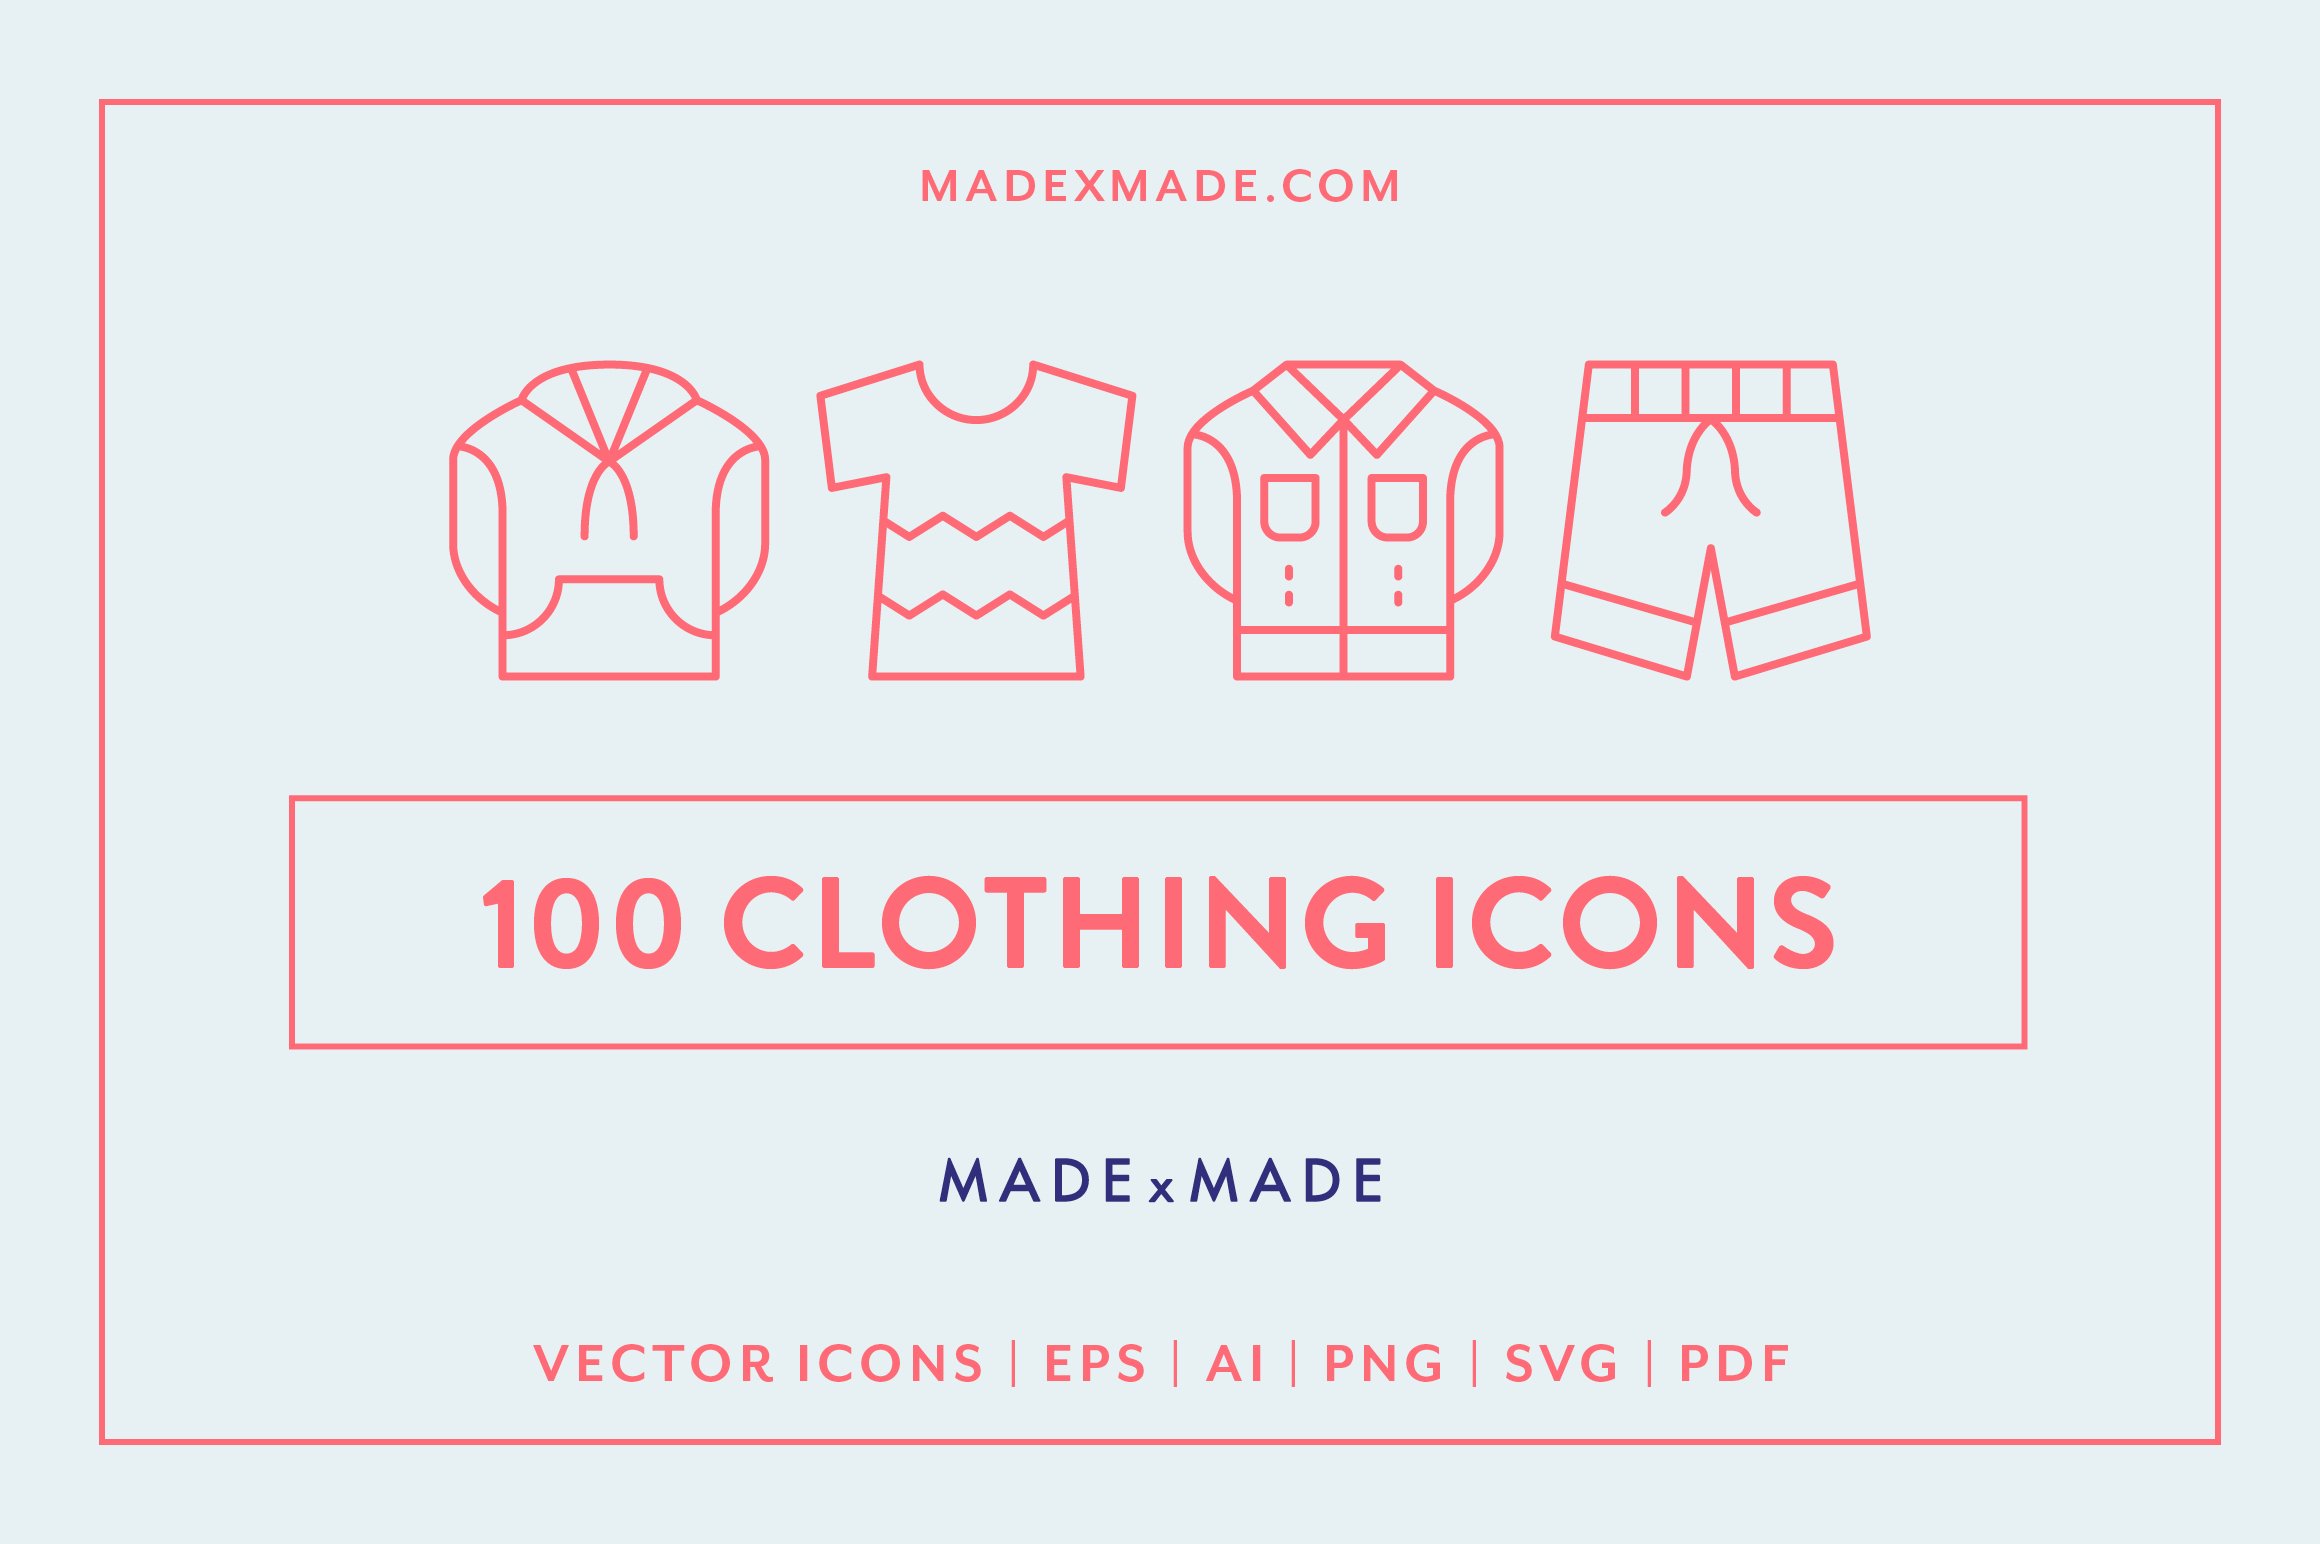 Clothing Icons cover image.